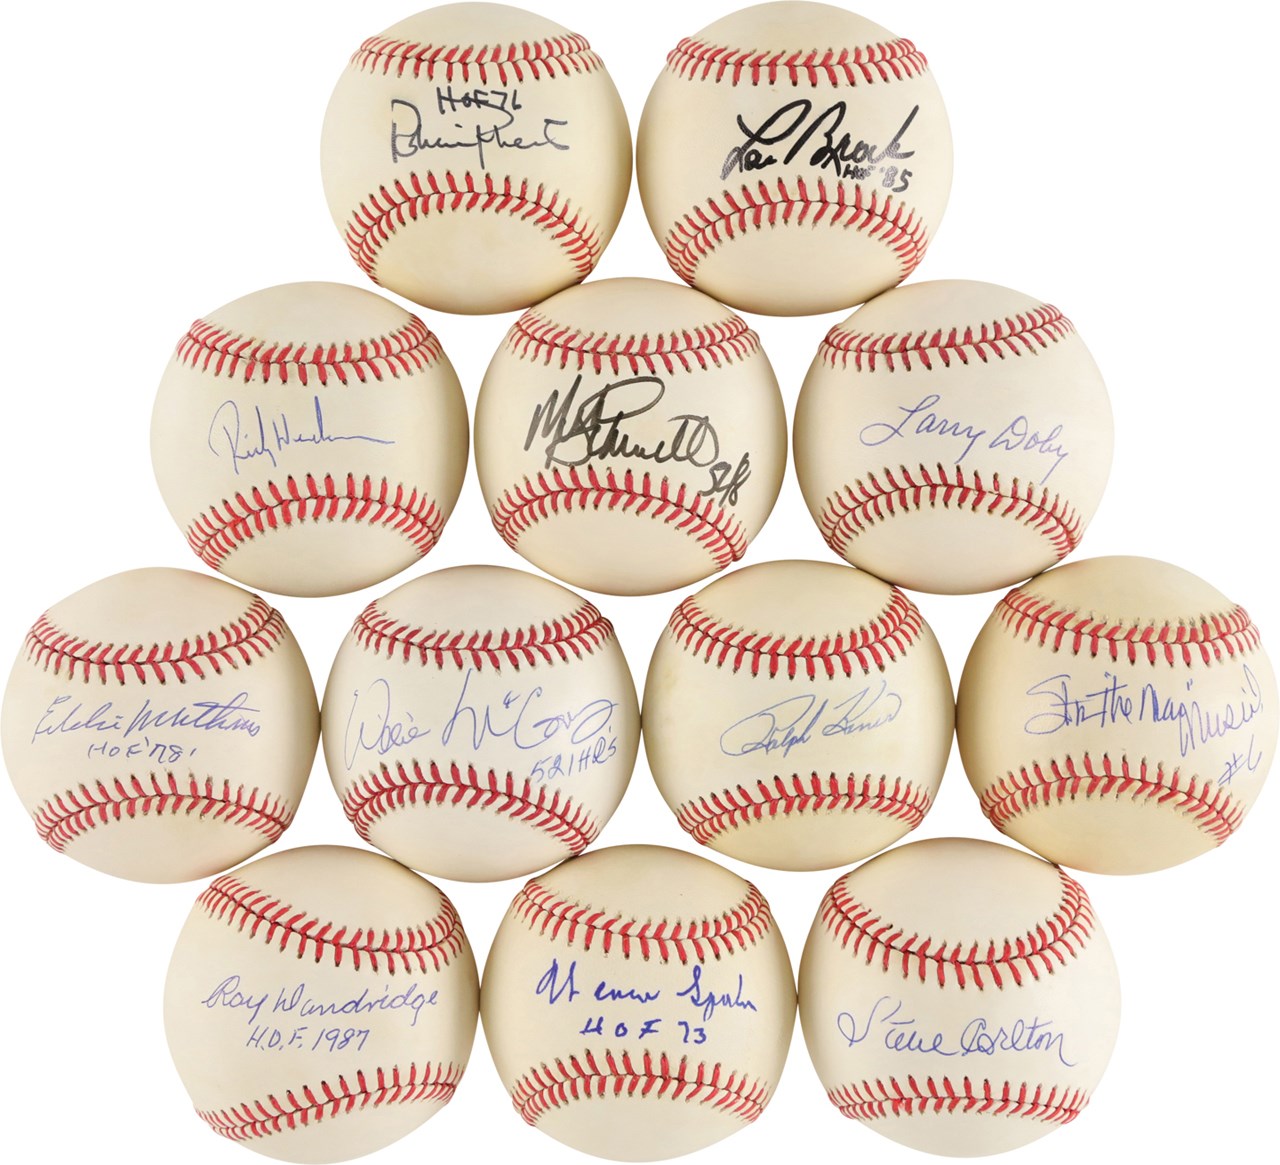 - Enormous Hall of Fame Single Signed Baseball Collection (81)